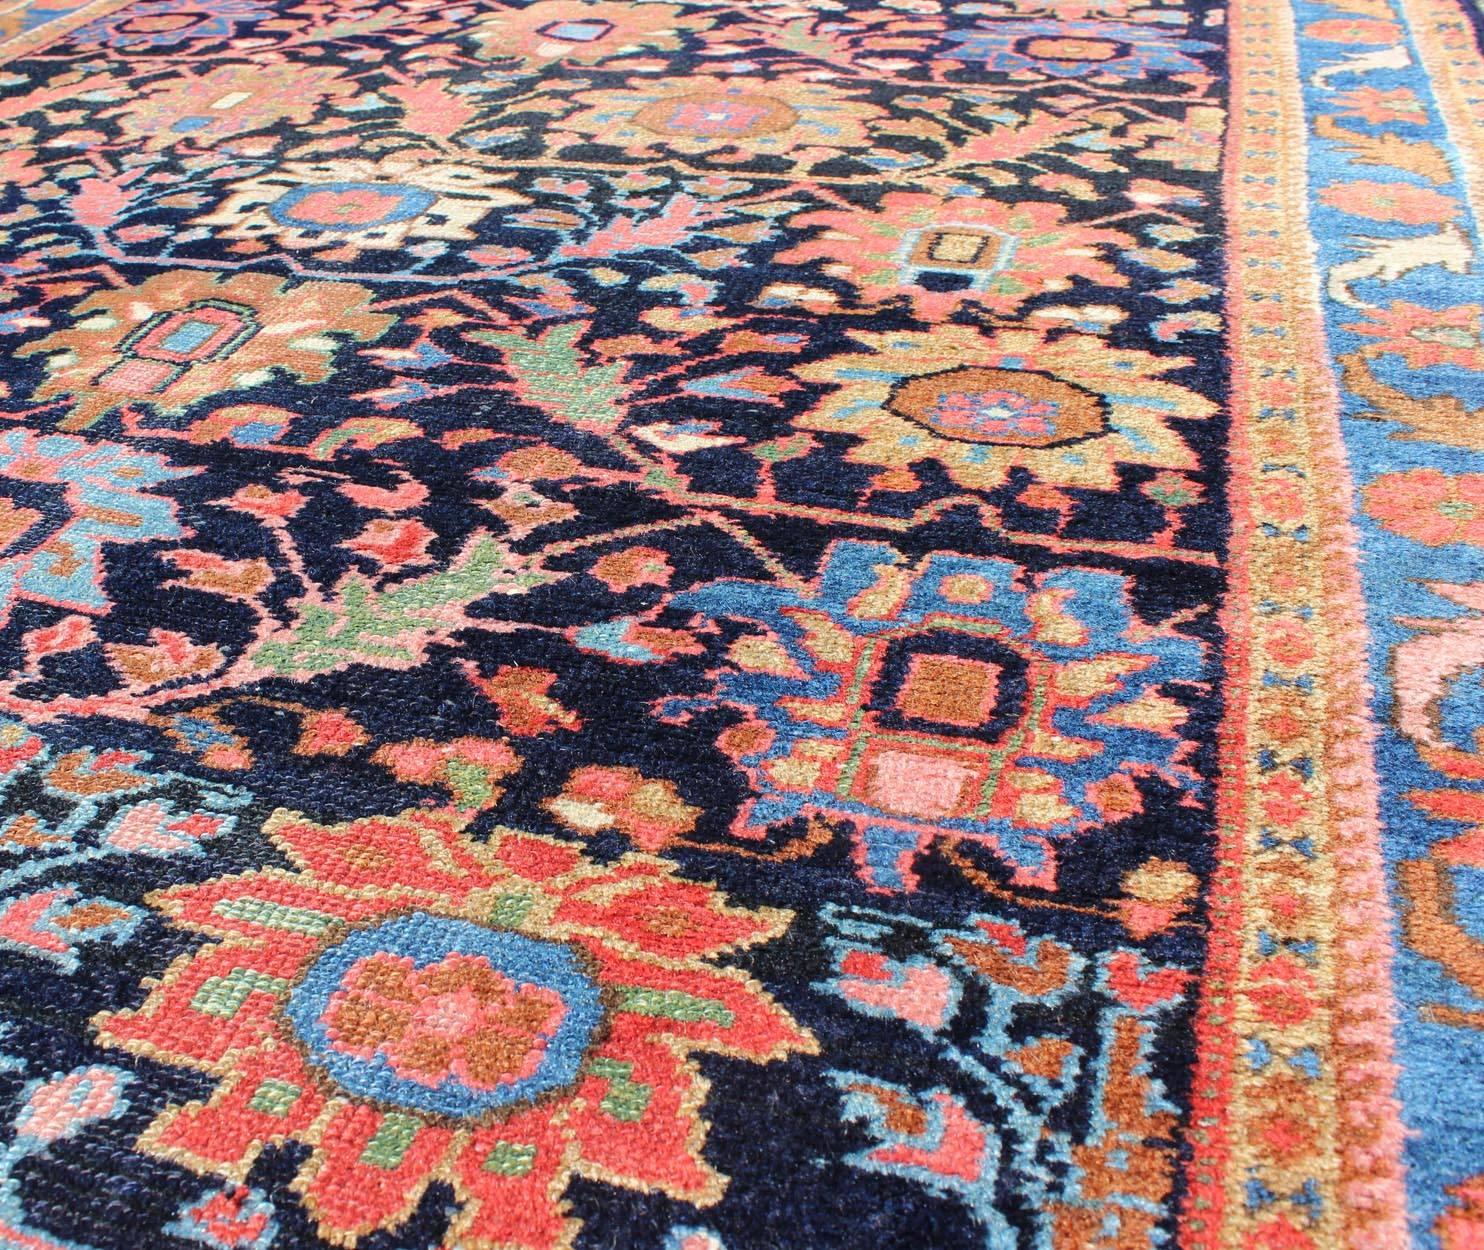 Early 20th Century Antique Persian Malayer Rug with Large Floral Motifs in Navy and Multi Colors For Sale